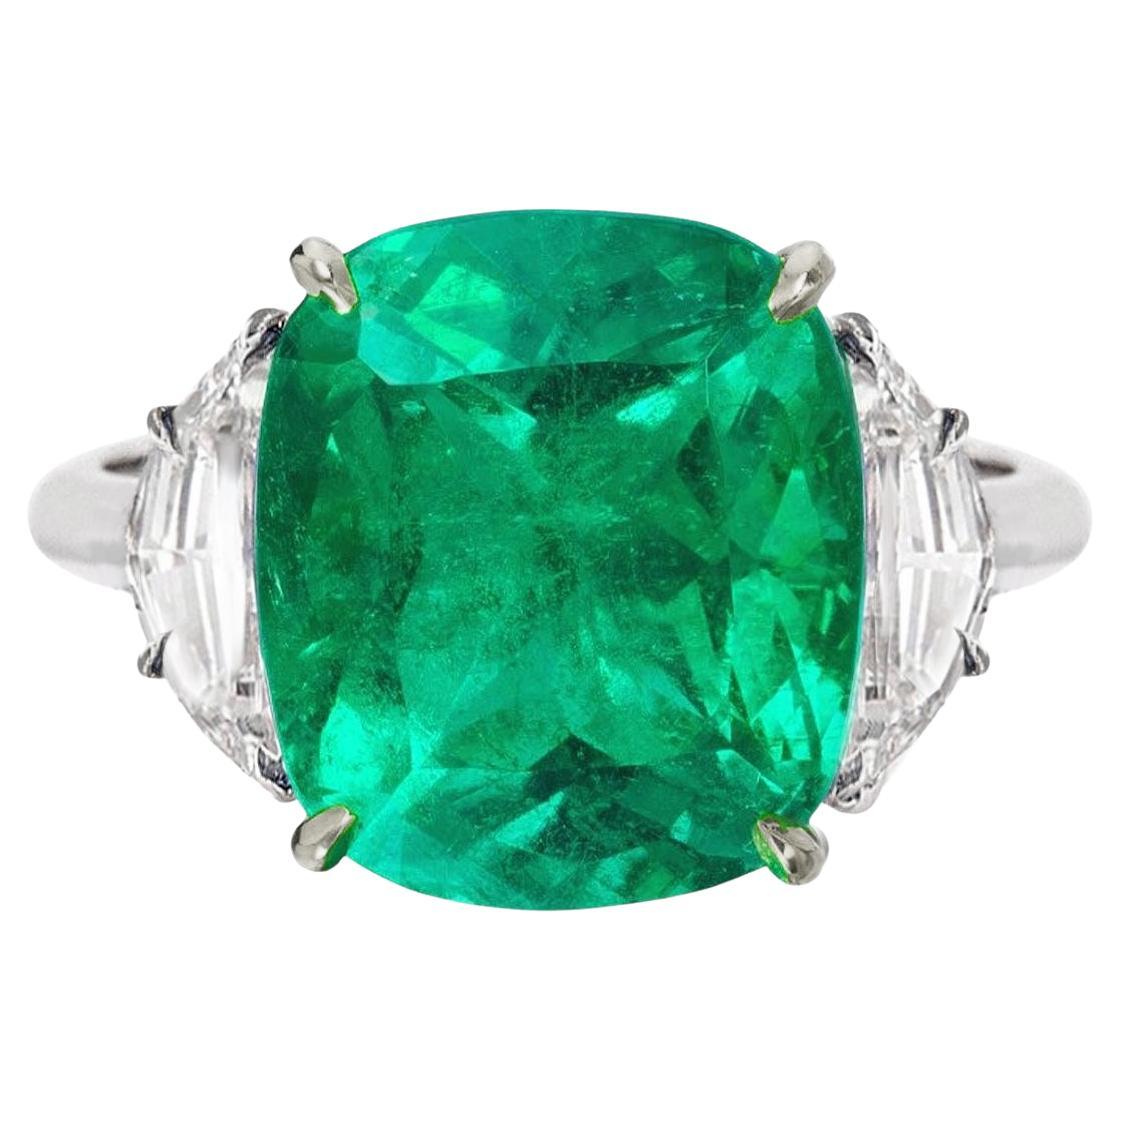 GRS Certified 4.44 Ct Insignificant Oil Cushion Cut Green Emerald Diamond Ring For Sale